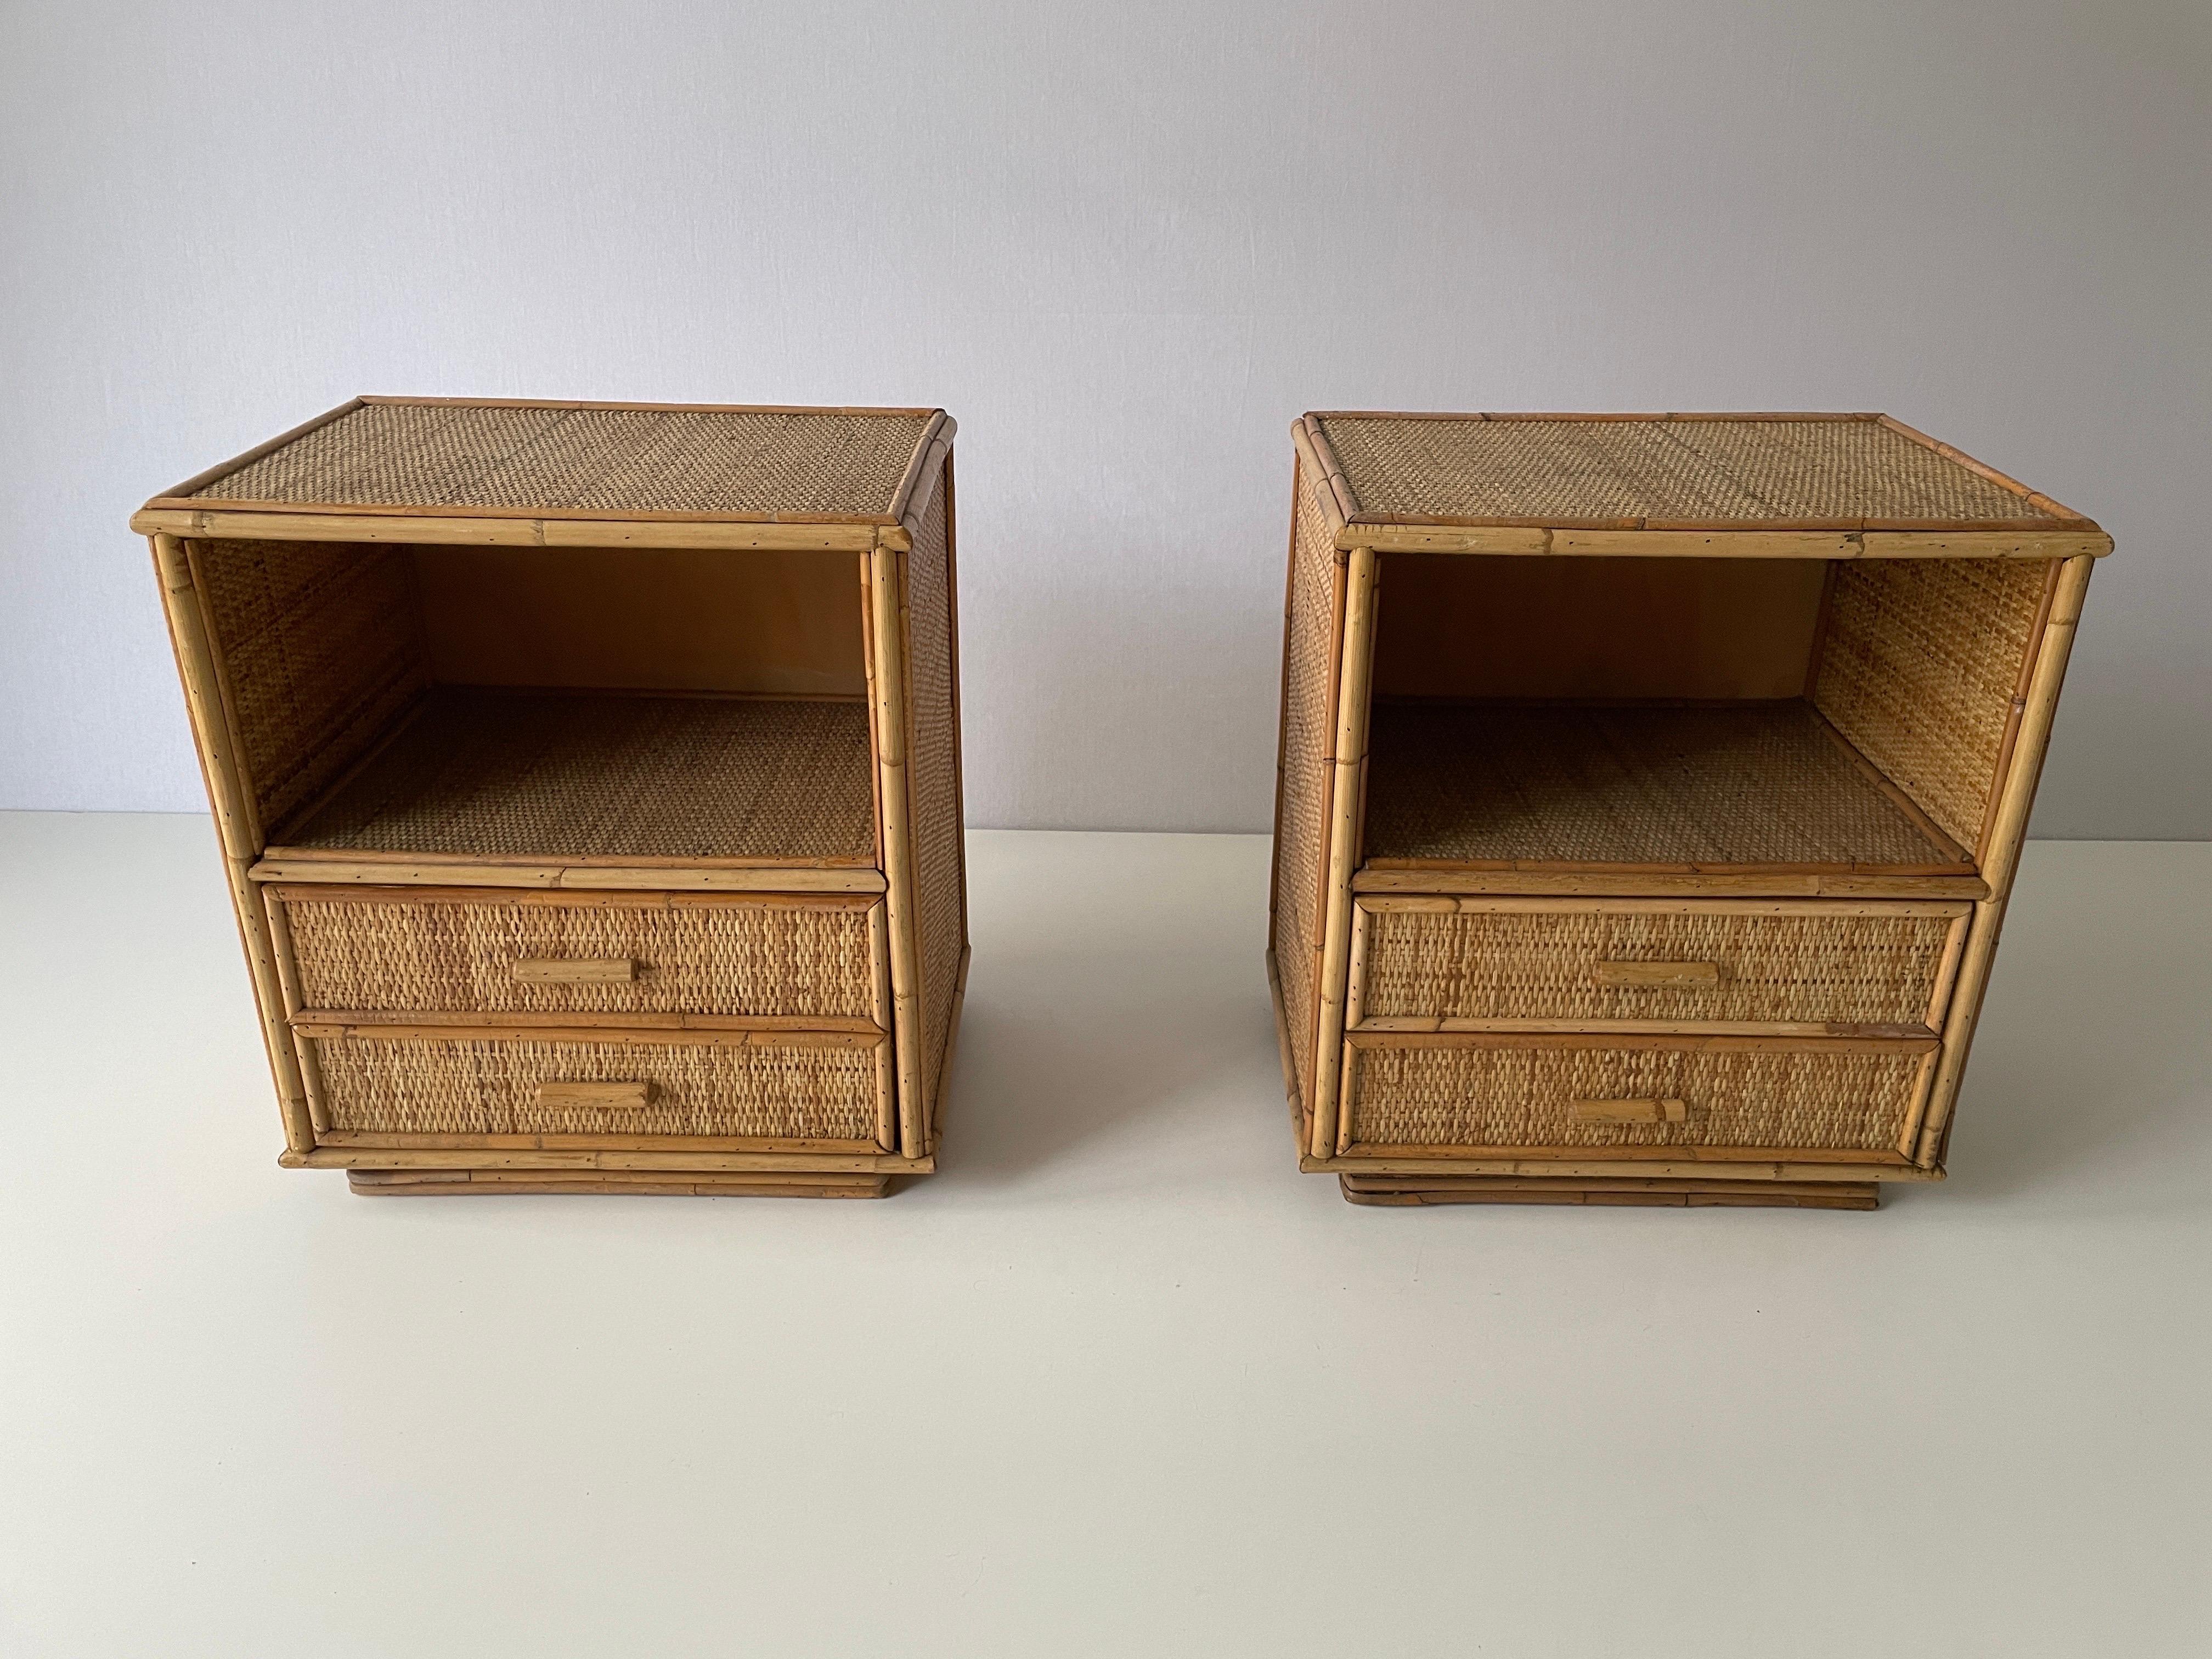 Italian Mid-century Bamboo & Rattan Pair of Bedside Tables, 1970s, Italy For Sale